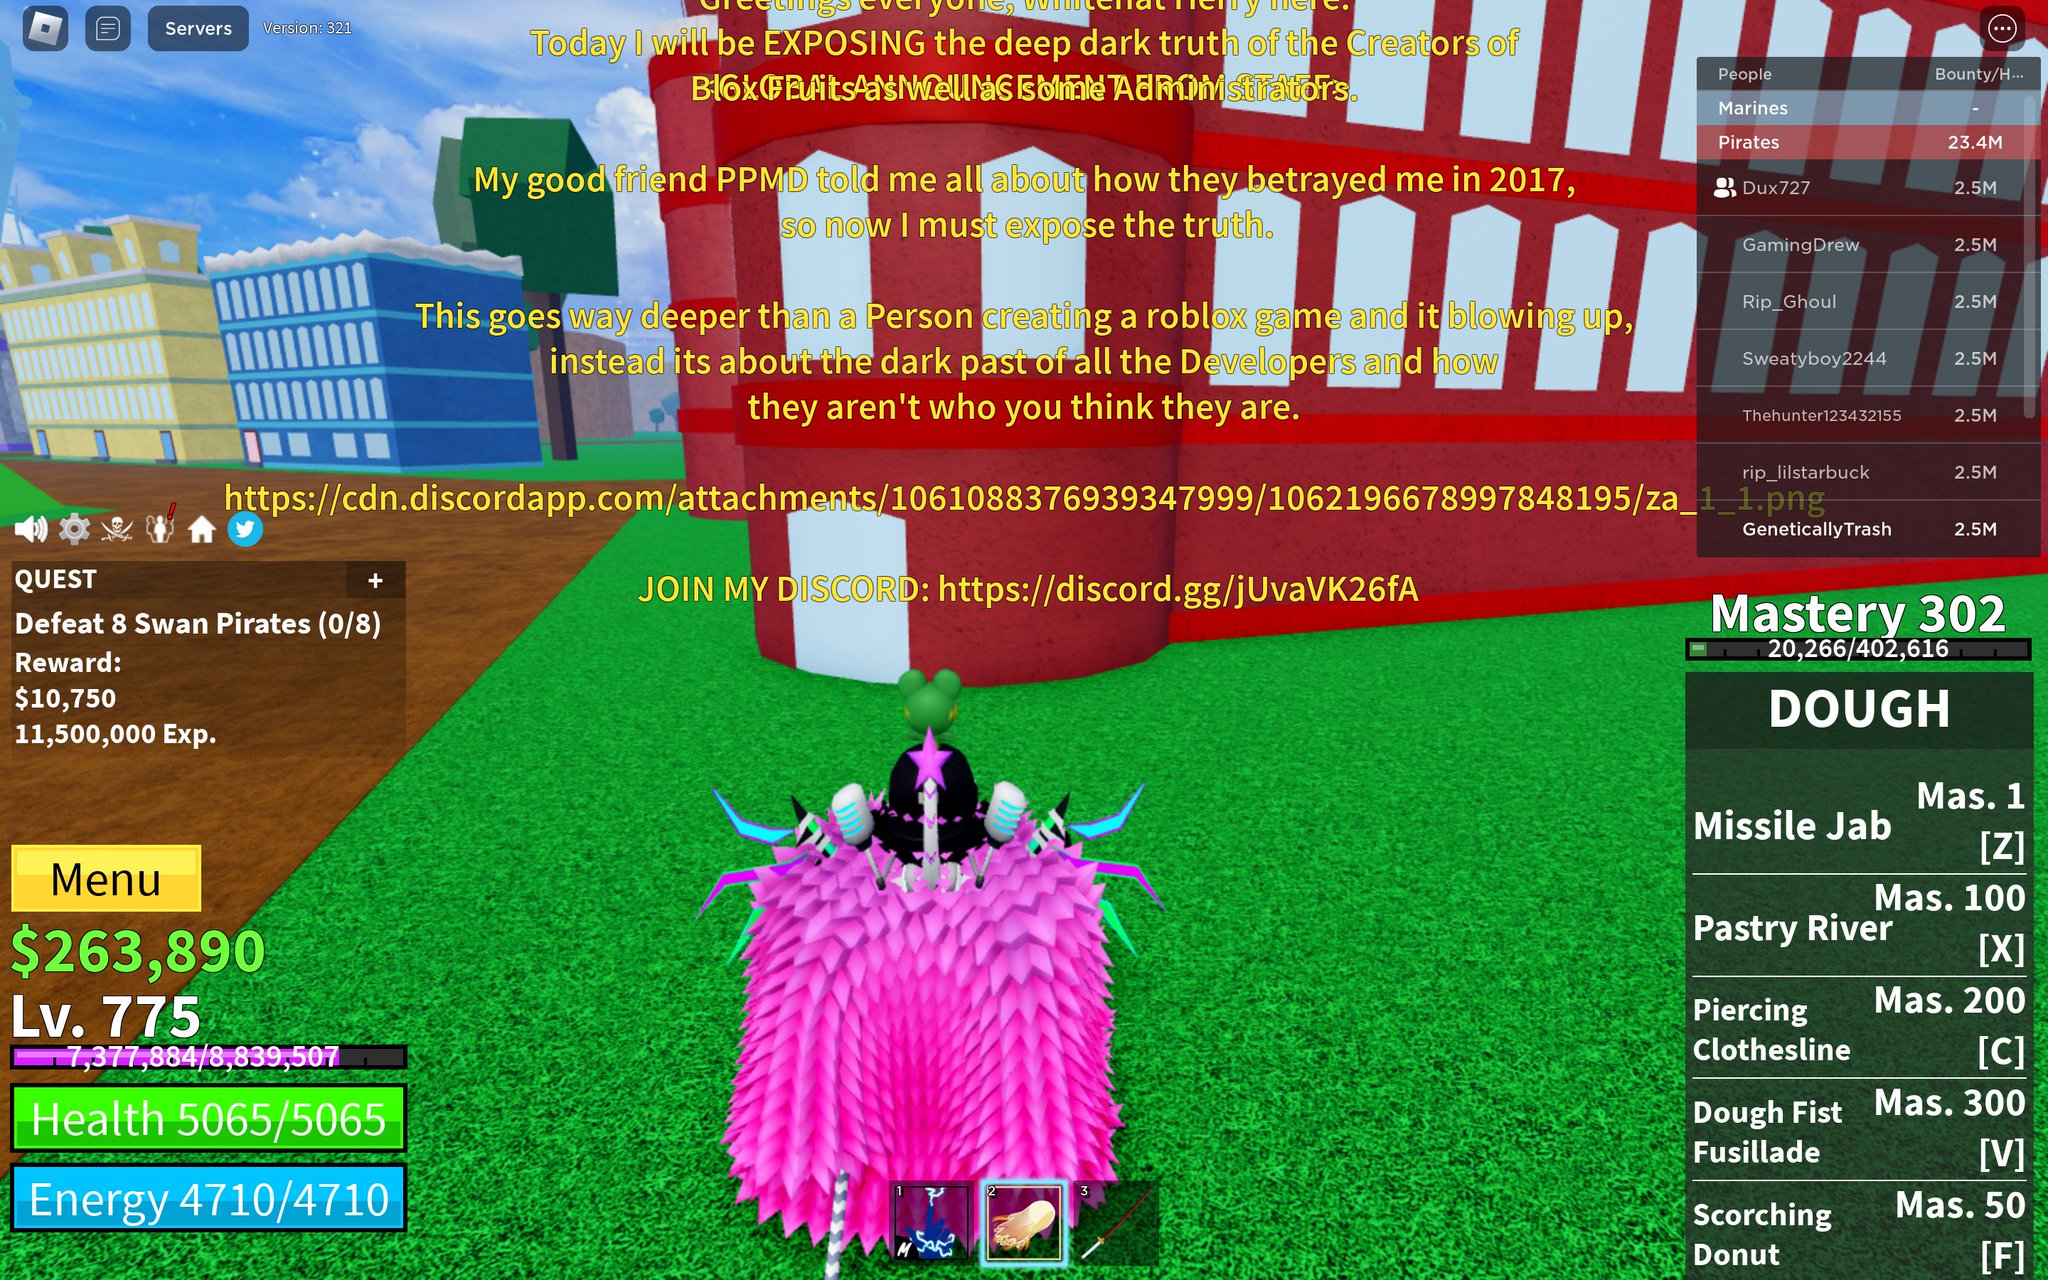 Blox Fruits got HACKED while we were playing 